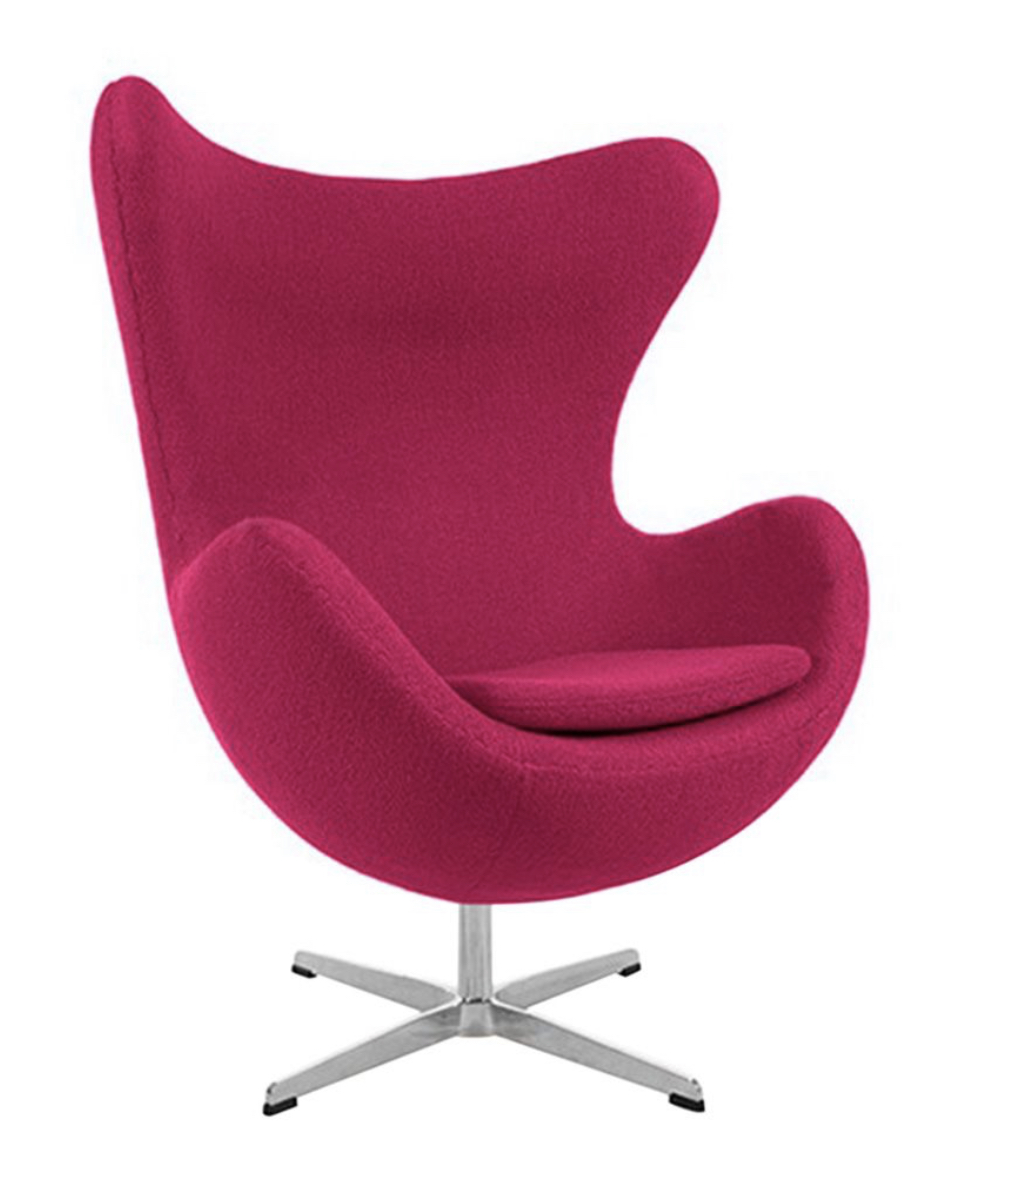 Arne Jacobsen Style Egg Chair Cashmere Pink